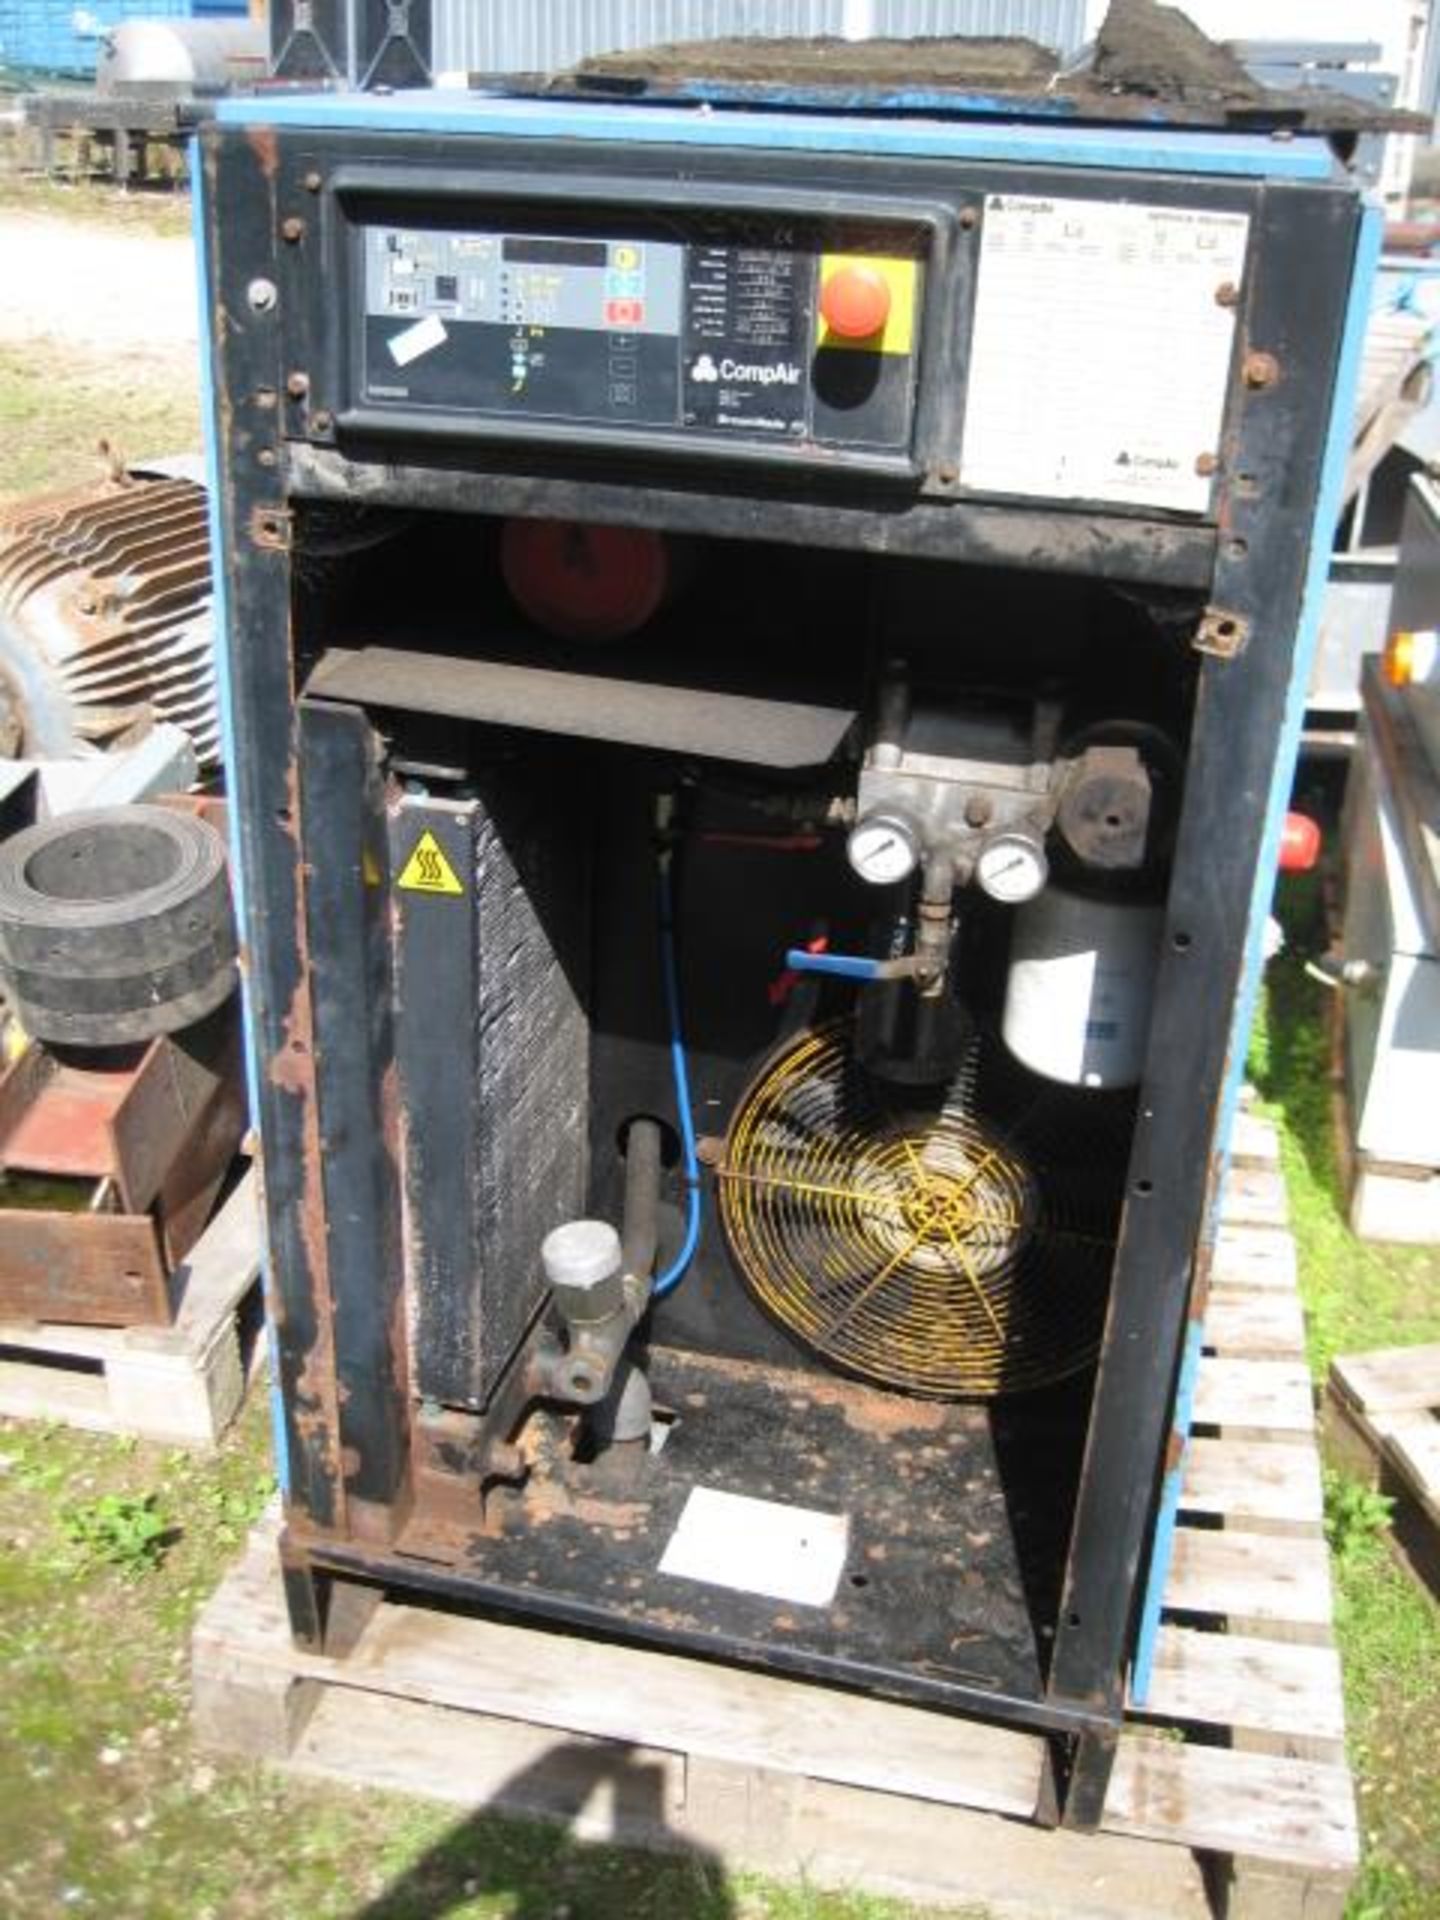 Broomwade Compair Cyclon 22 Compressor, serial no. F165/1678, year of manufacture 1998, in